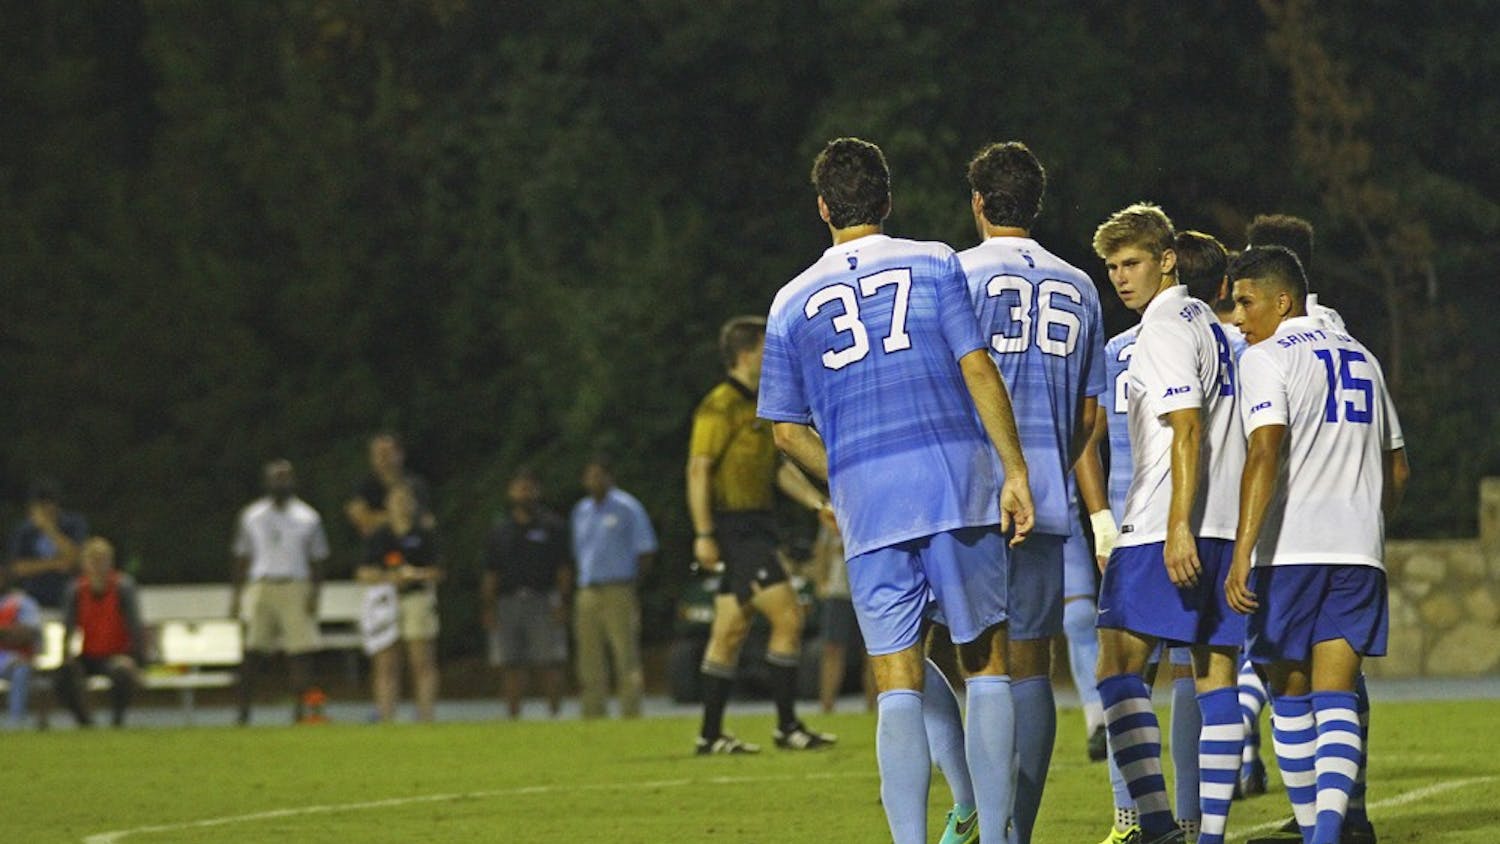 Redshirt seniors Walker and Tucker Hume line up for a free kick against St. Louis. The twins, from San Angelo, Texas, played their first game together for UNC against Cal Poly.